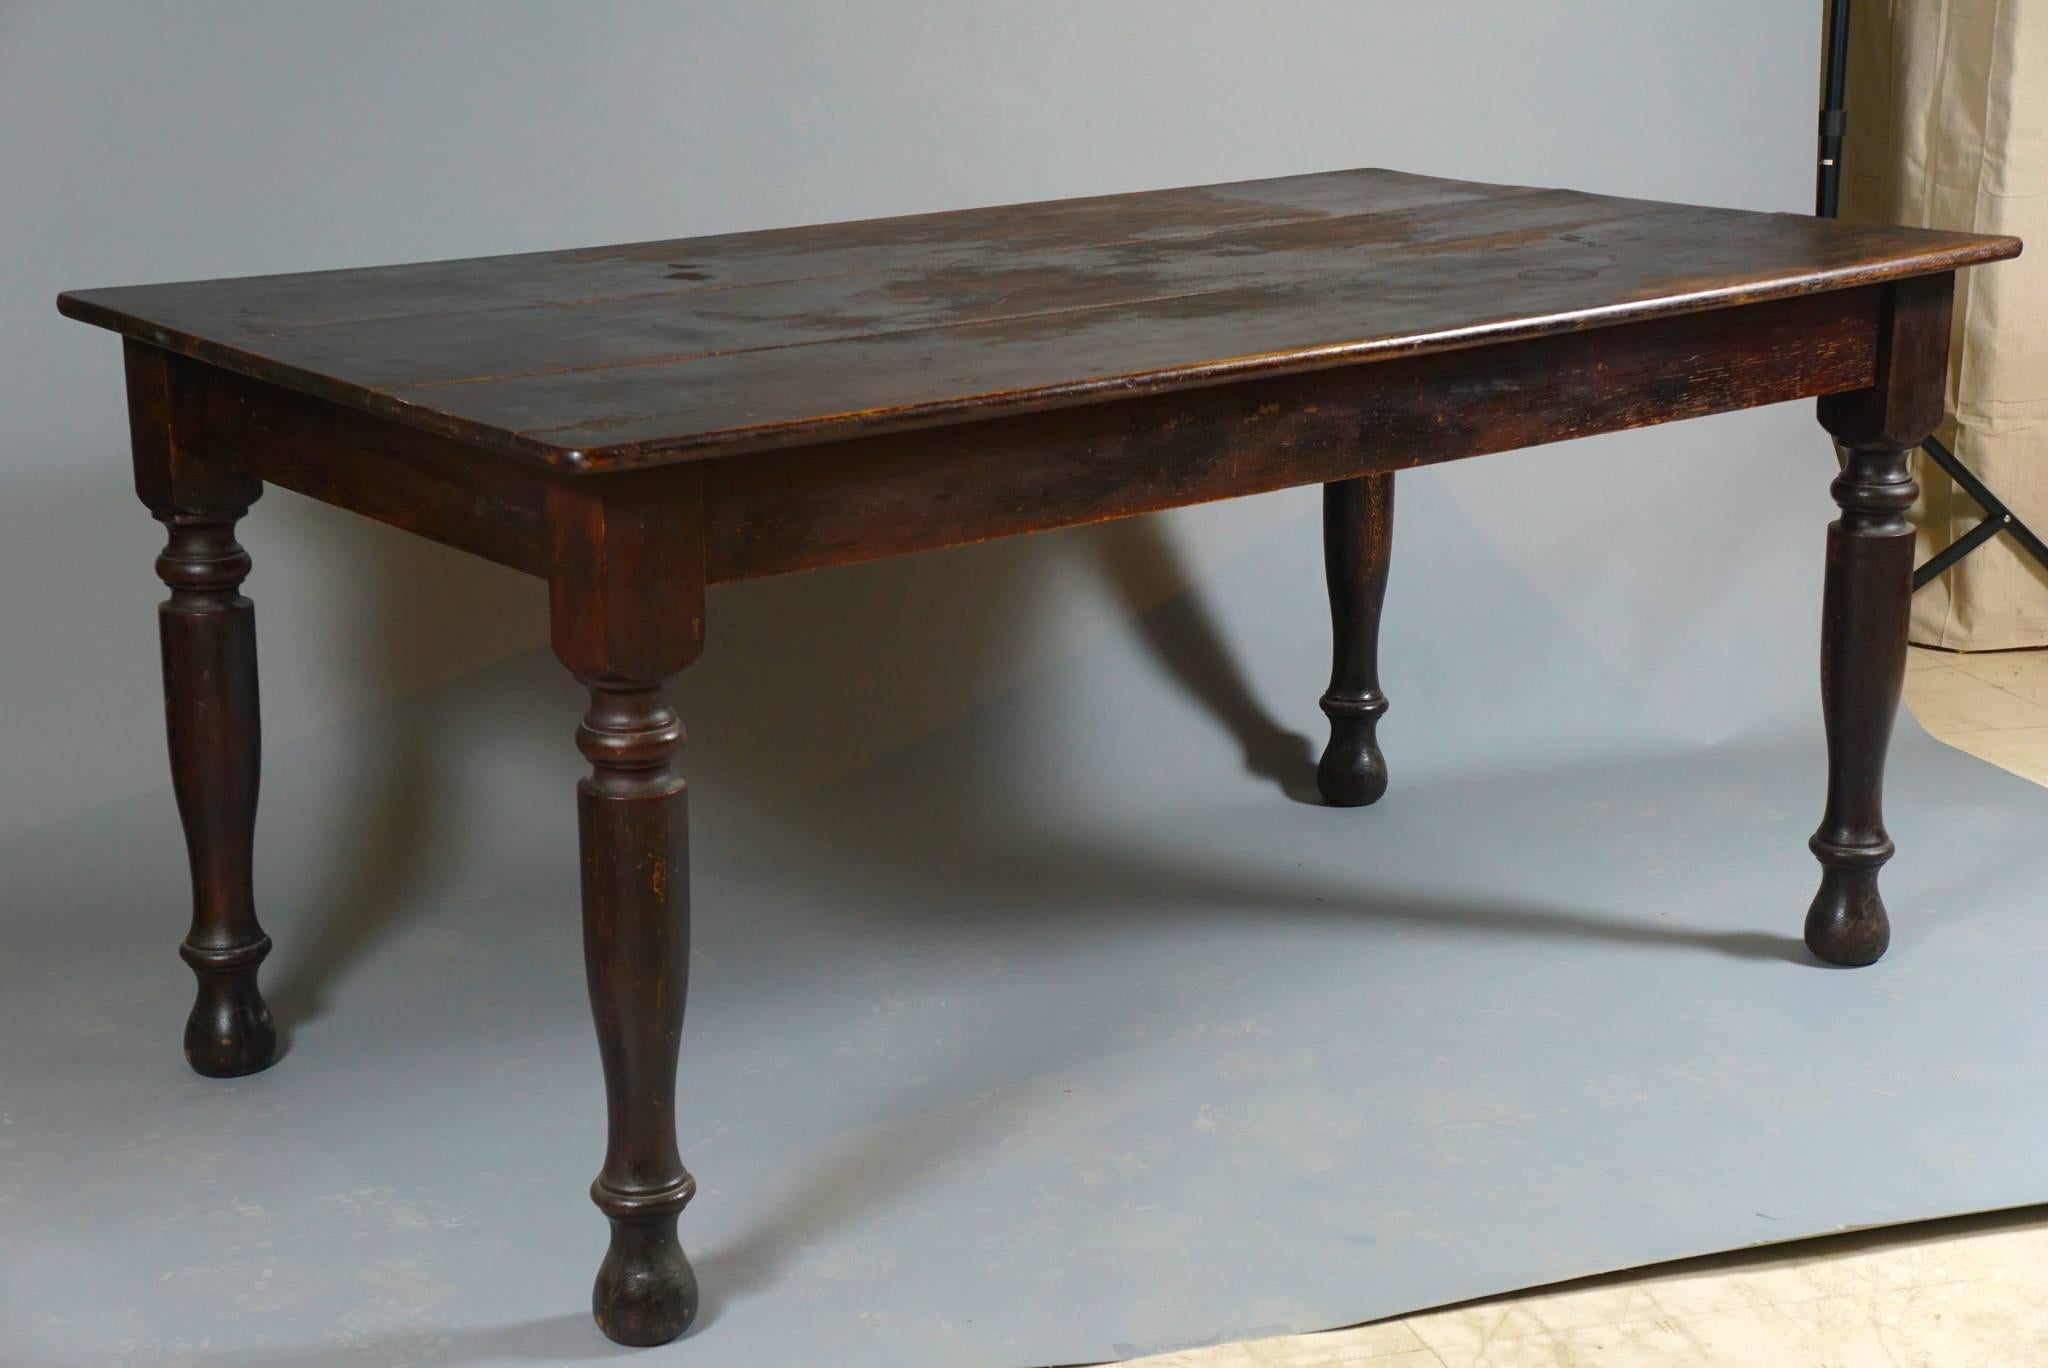 Farm table with deep mahogany finish. Nicely turned legs and a great color.
Table measure 38 inches deep and 66 inches long.